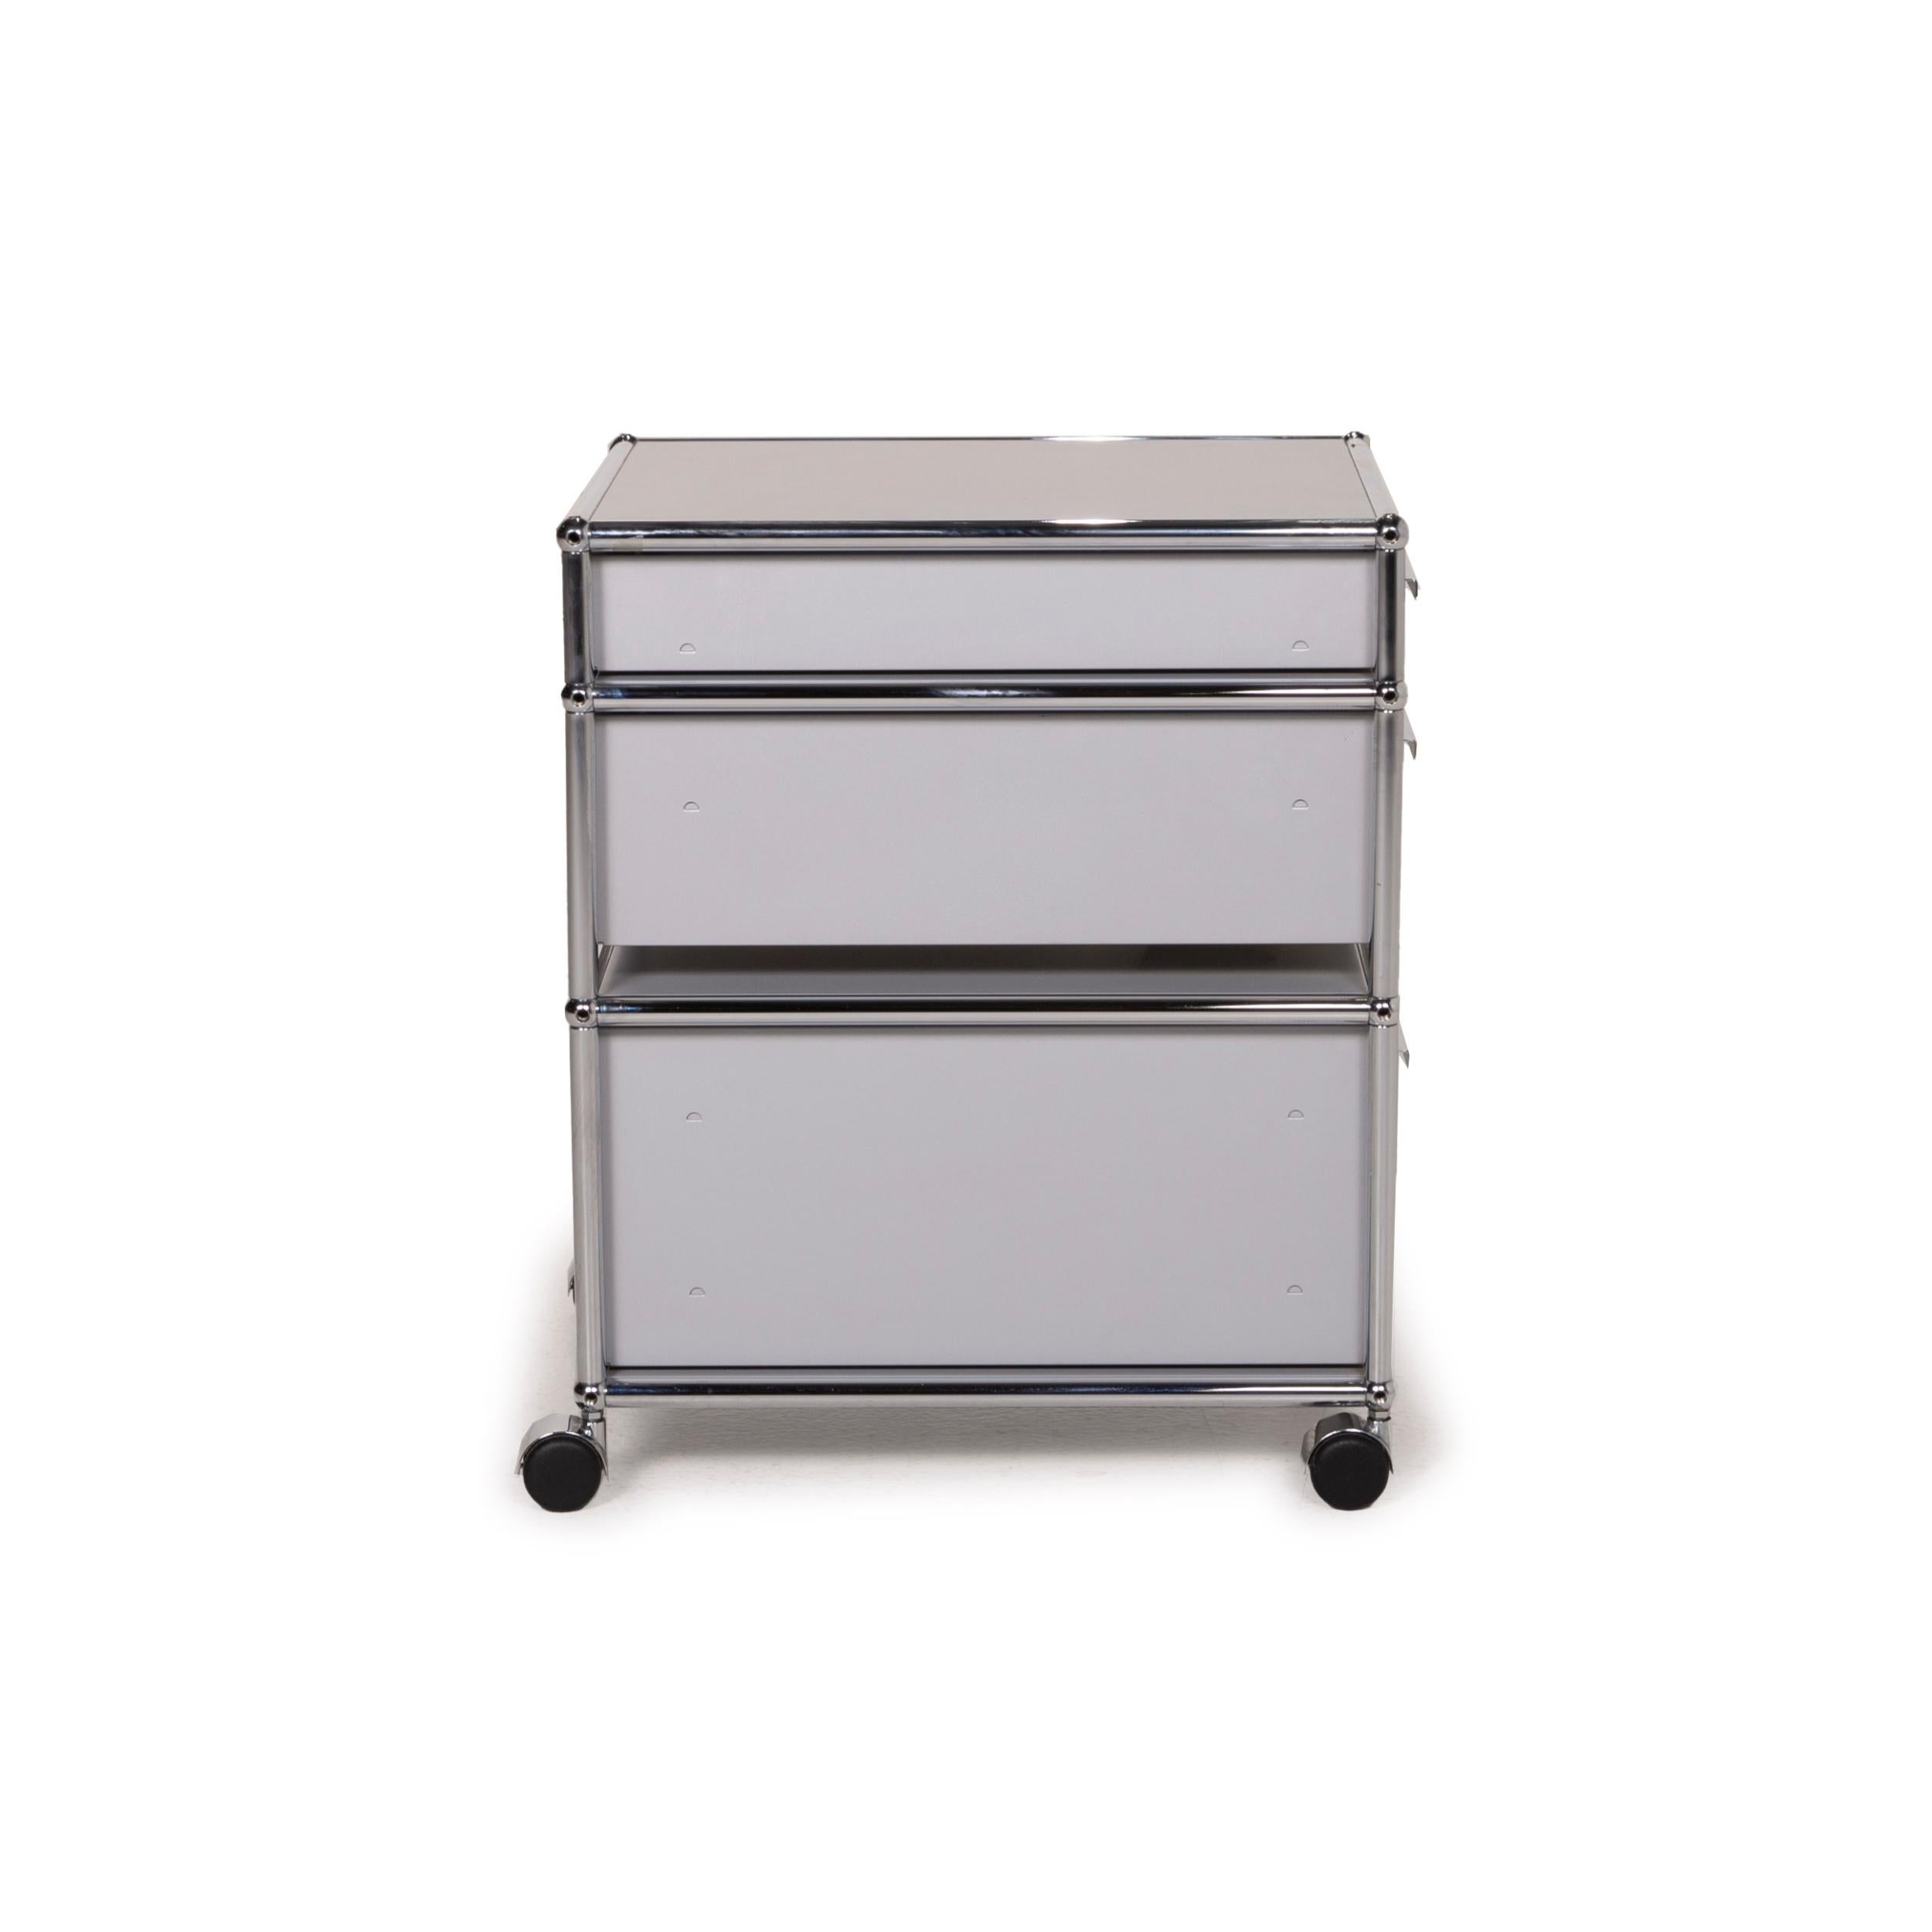 USM Haller Metal Sideboard Gray Roll Container Drawer Compartment Chrome Office 2